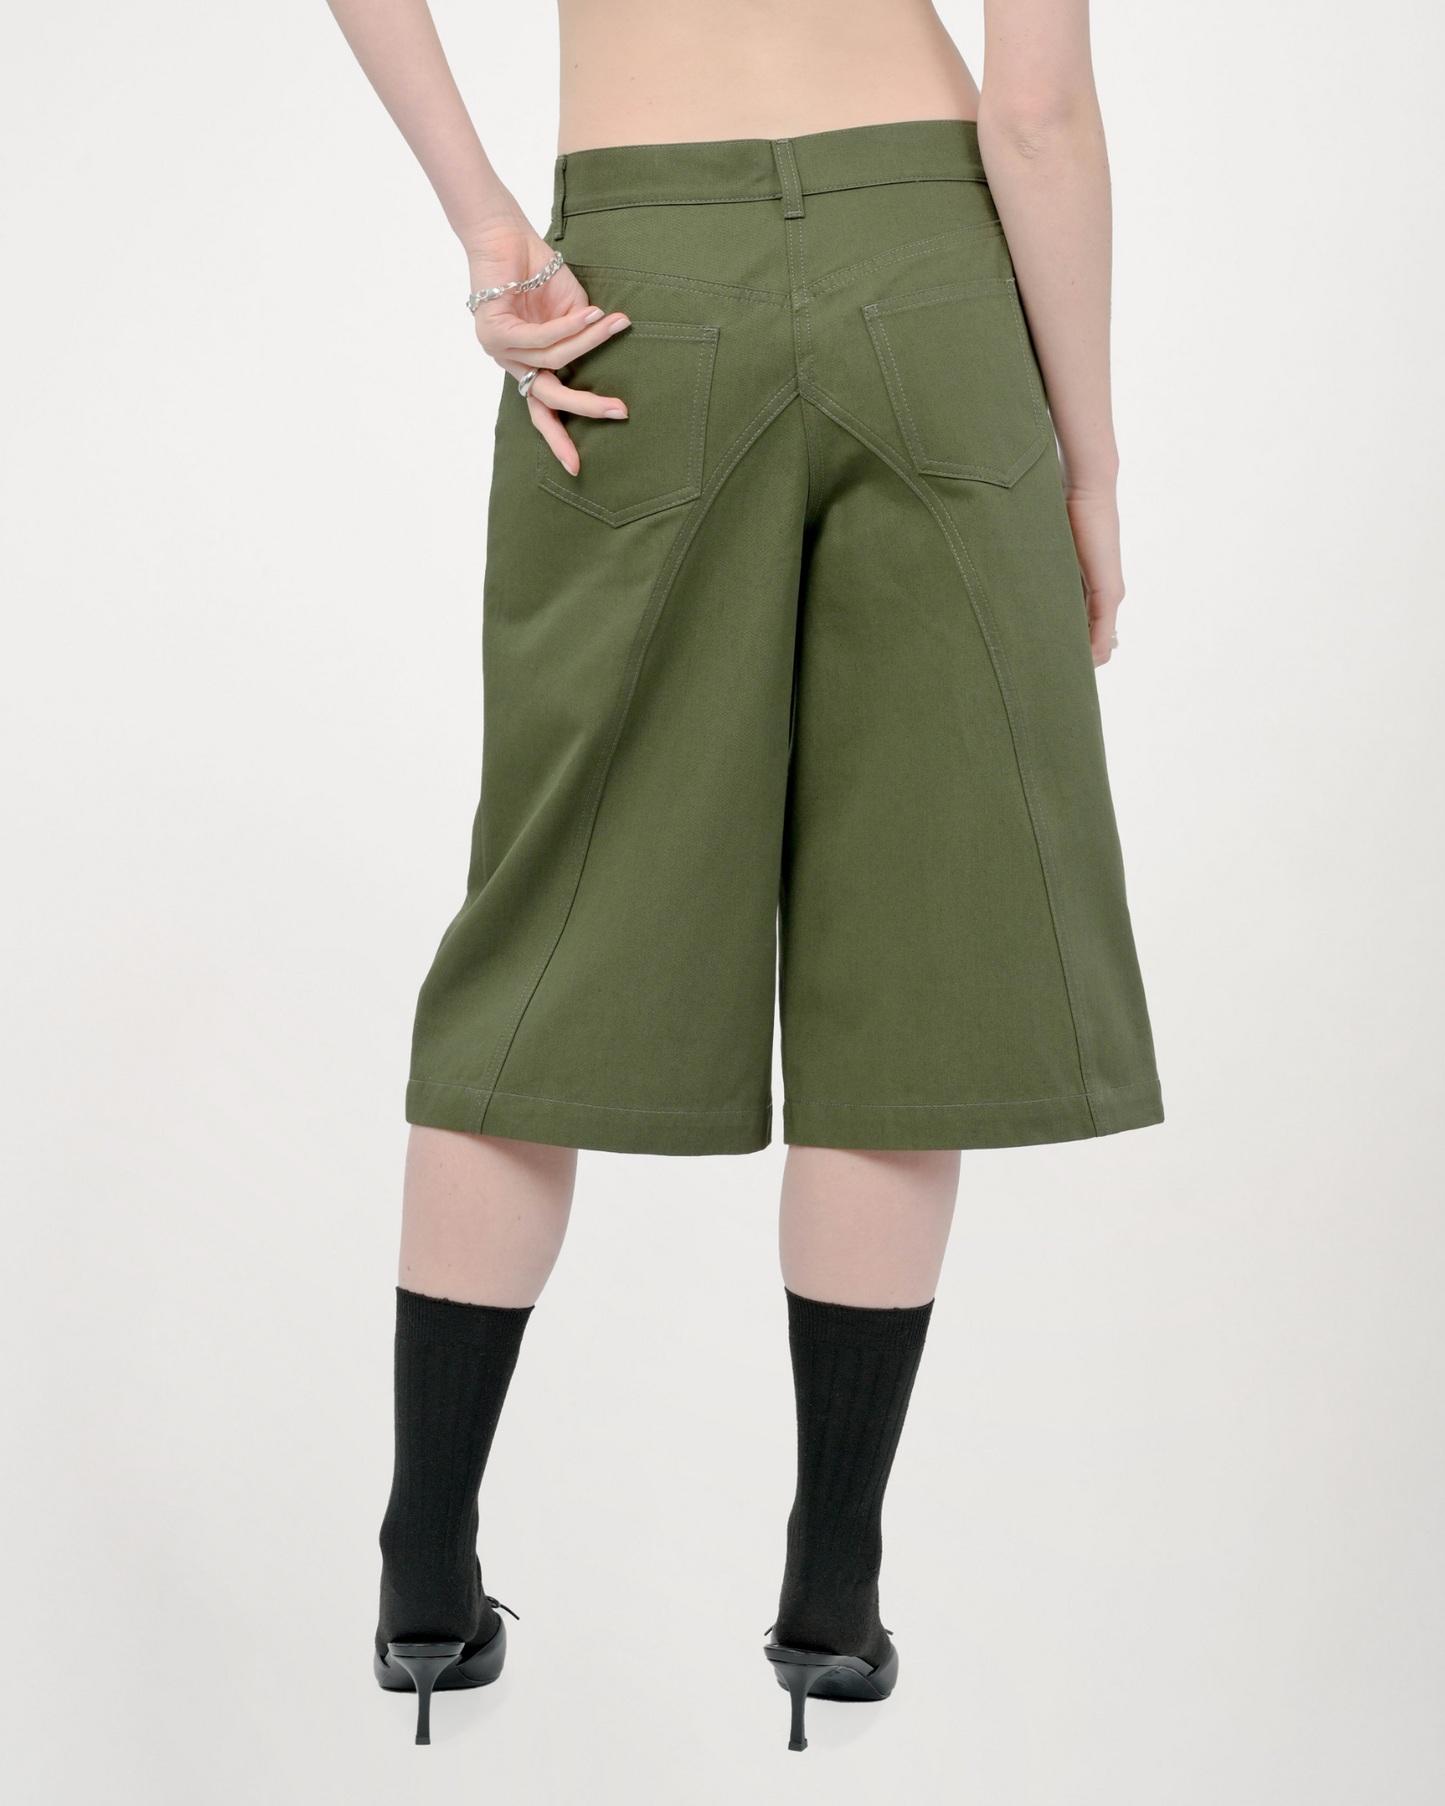 Model is wearing size Small in Tommi Shorts in Olive Green by Aseye Studio